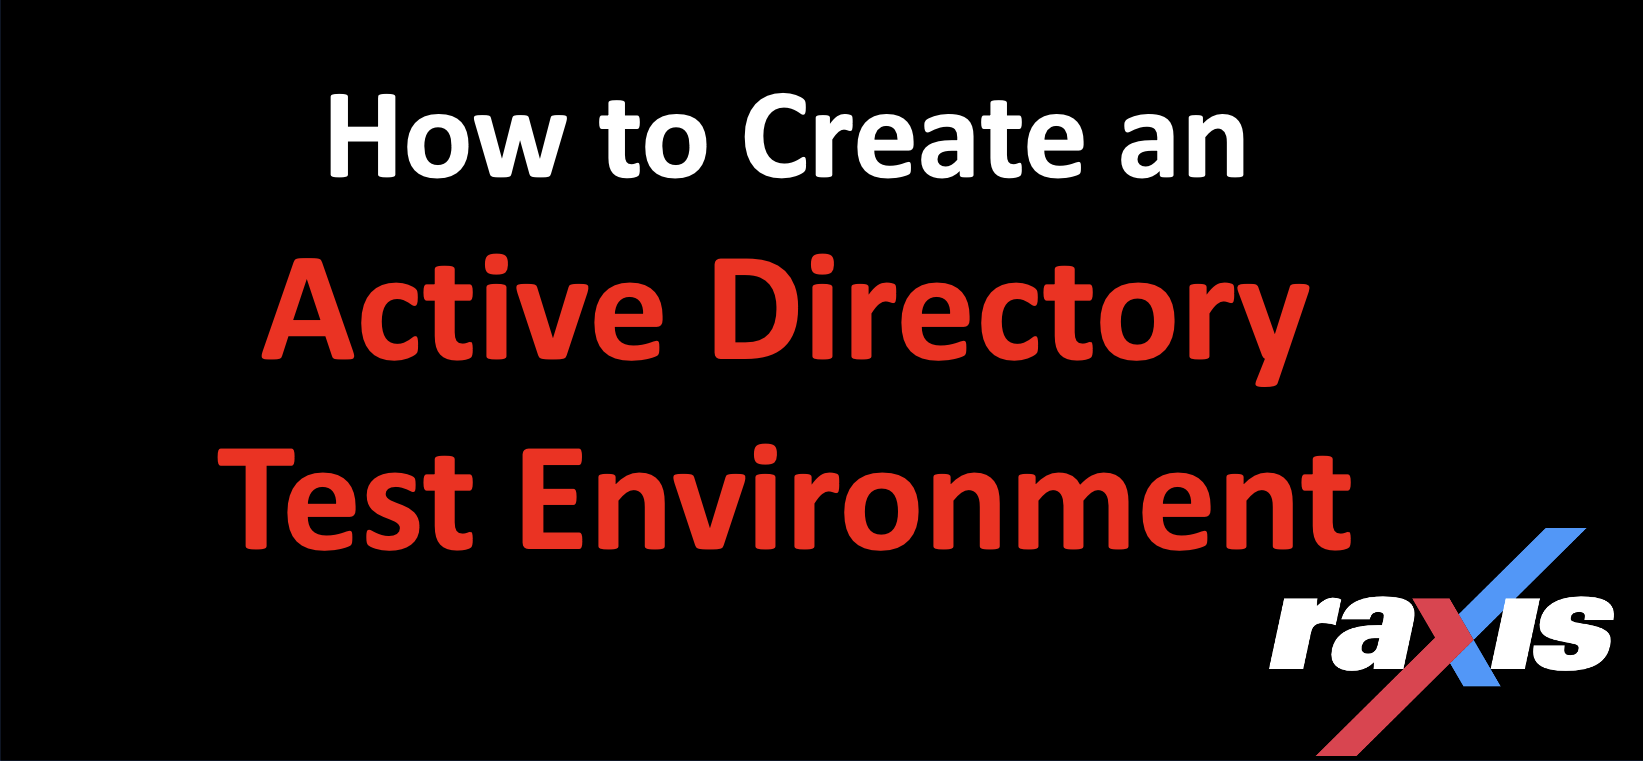 How to Create an Active Directory Test Environment